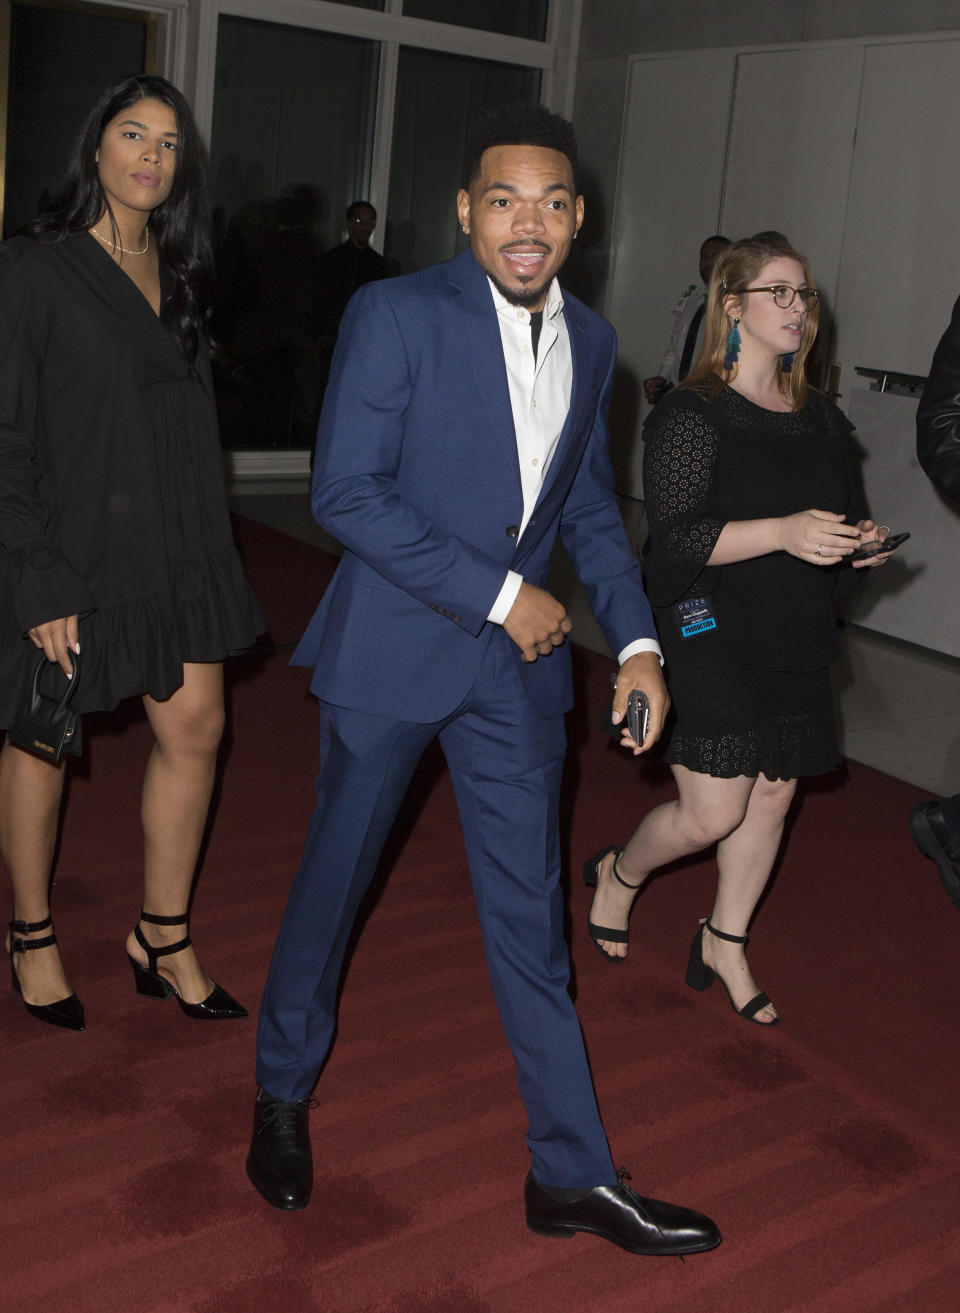 Chance the Rapper arrives at the Kennedy Center for the Performing Arts for the 22nd Annual Mark Twain Prize for American Humor presented to Dave Chappelle on Sunday, Oct. 27, 2019, in Washington, D.C. (Photo by Owen Sweeney/Invision/AP)